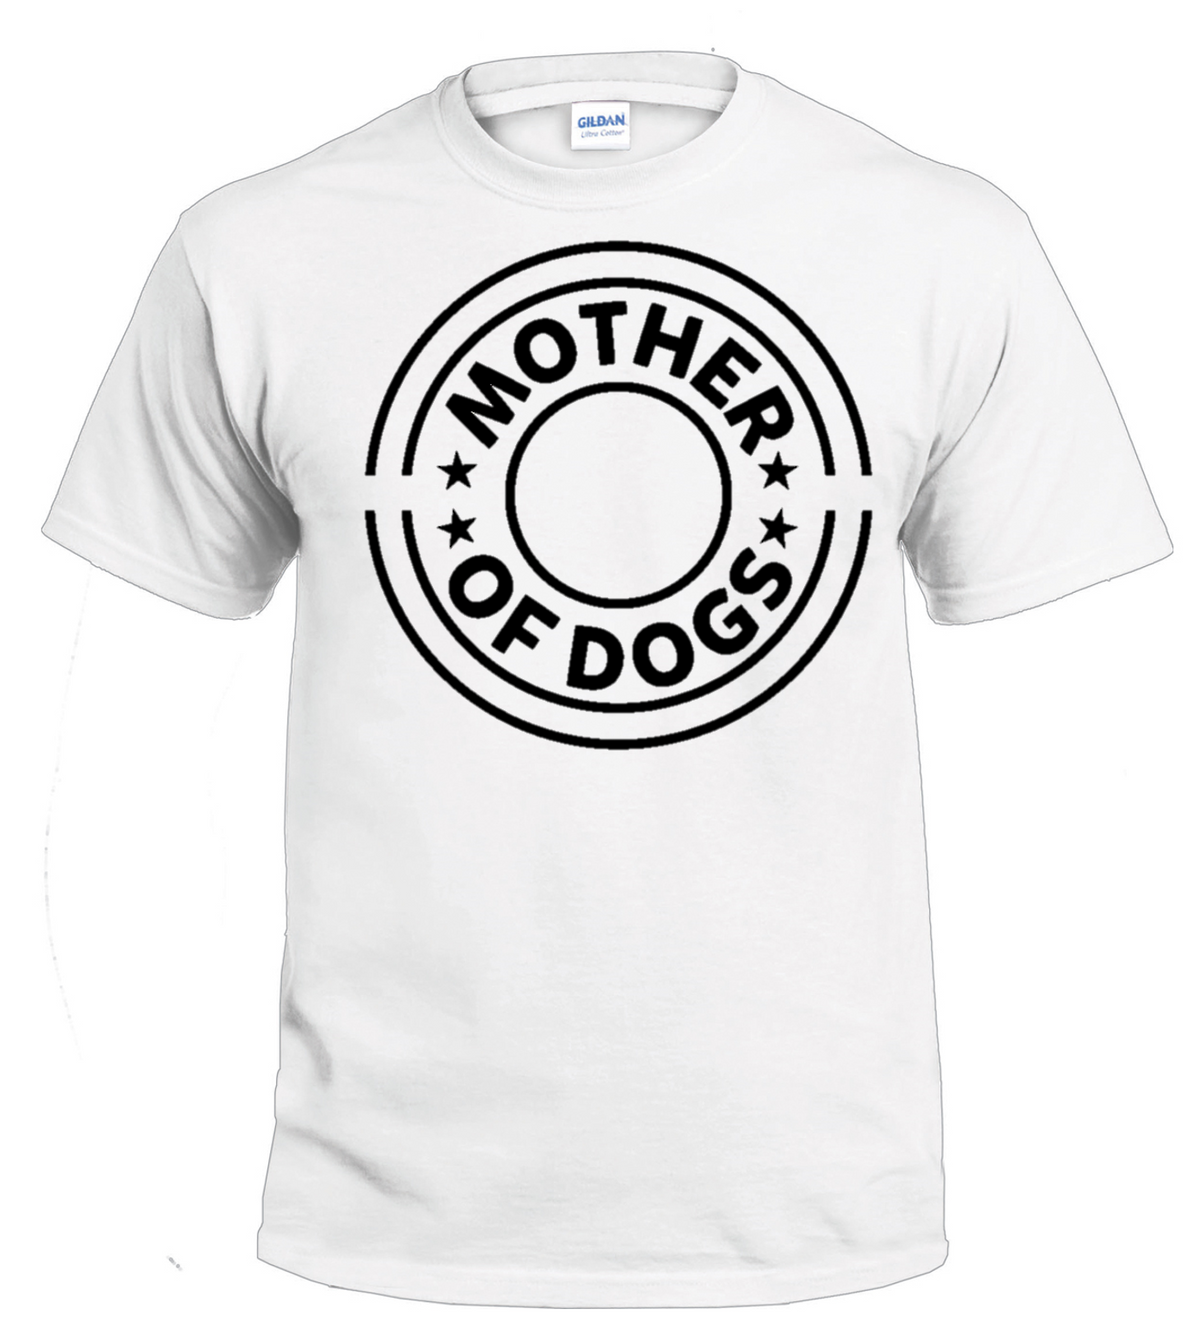 Mother of Dogs dog parent t-shirt